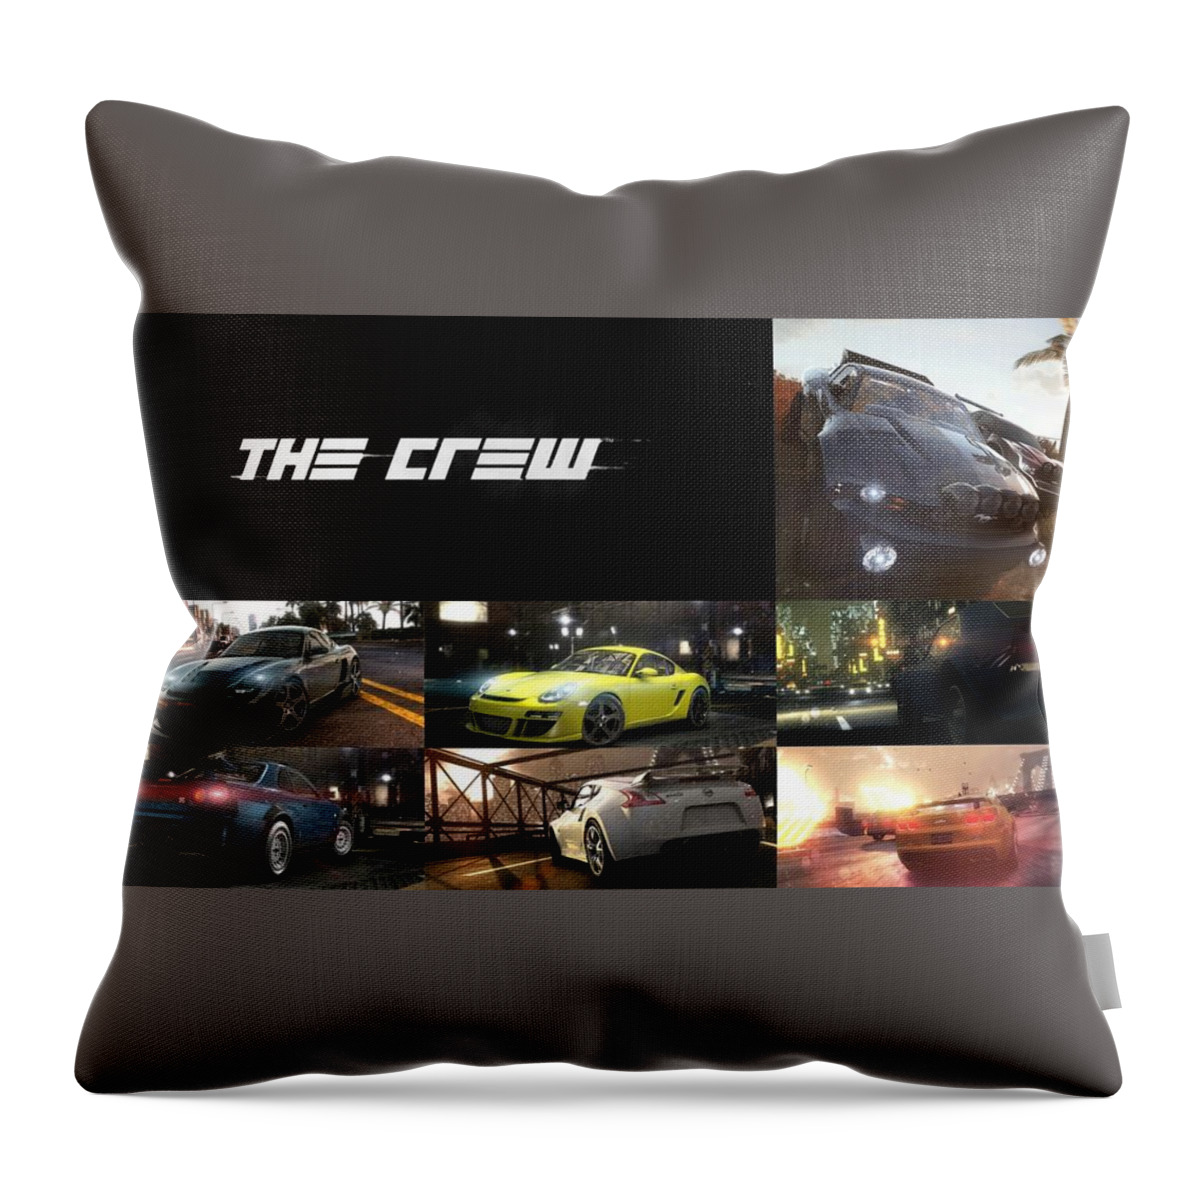 The Crew Throw Pillow featuring the digital art The Crew by Maye Loeser